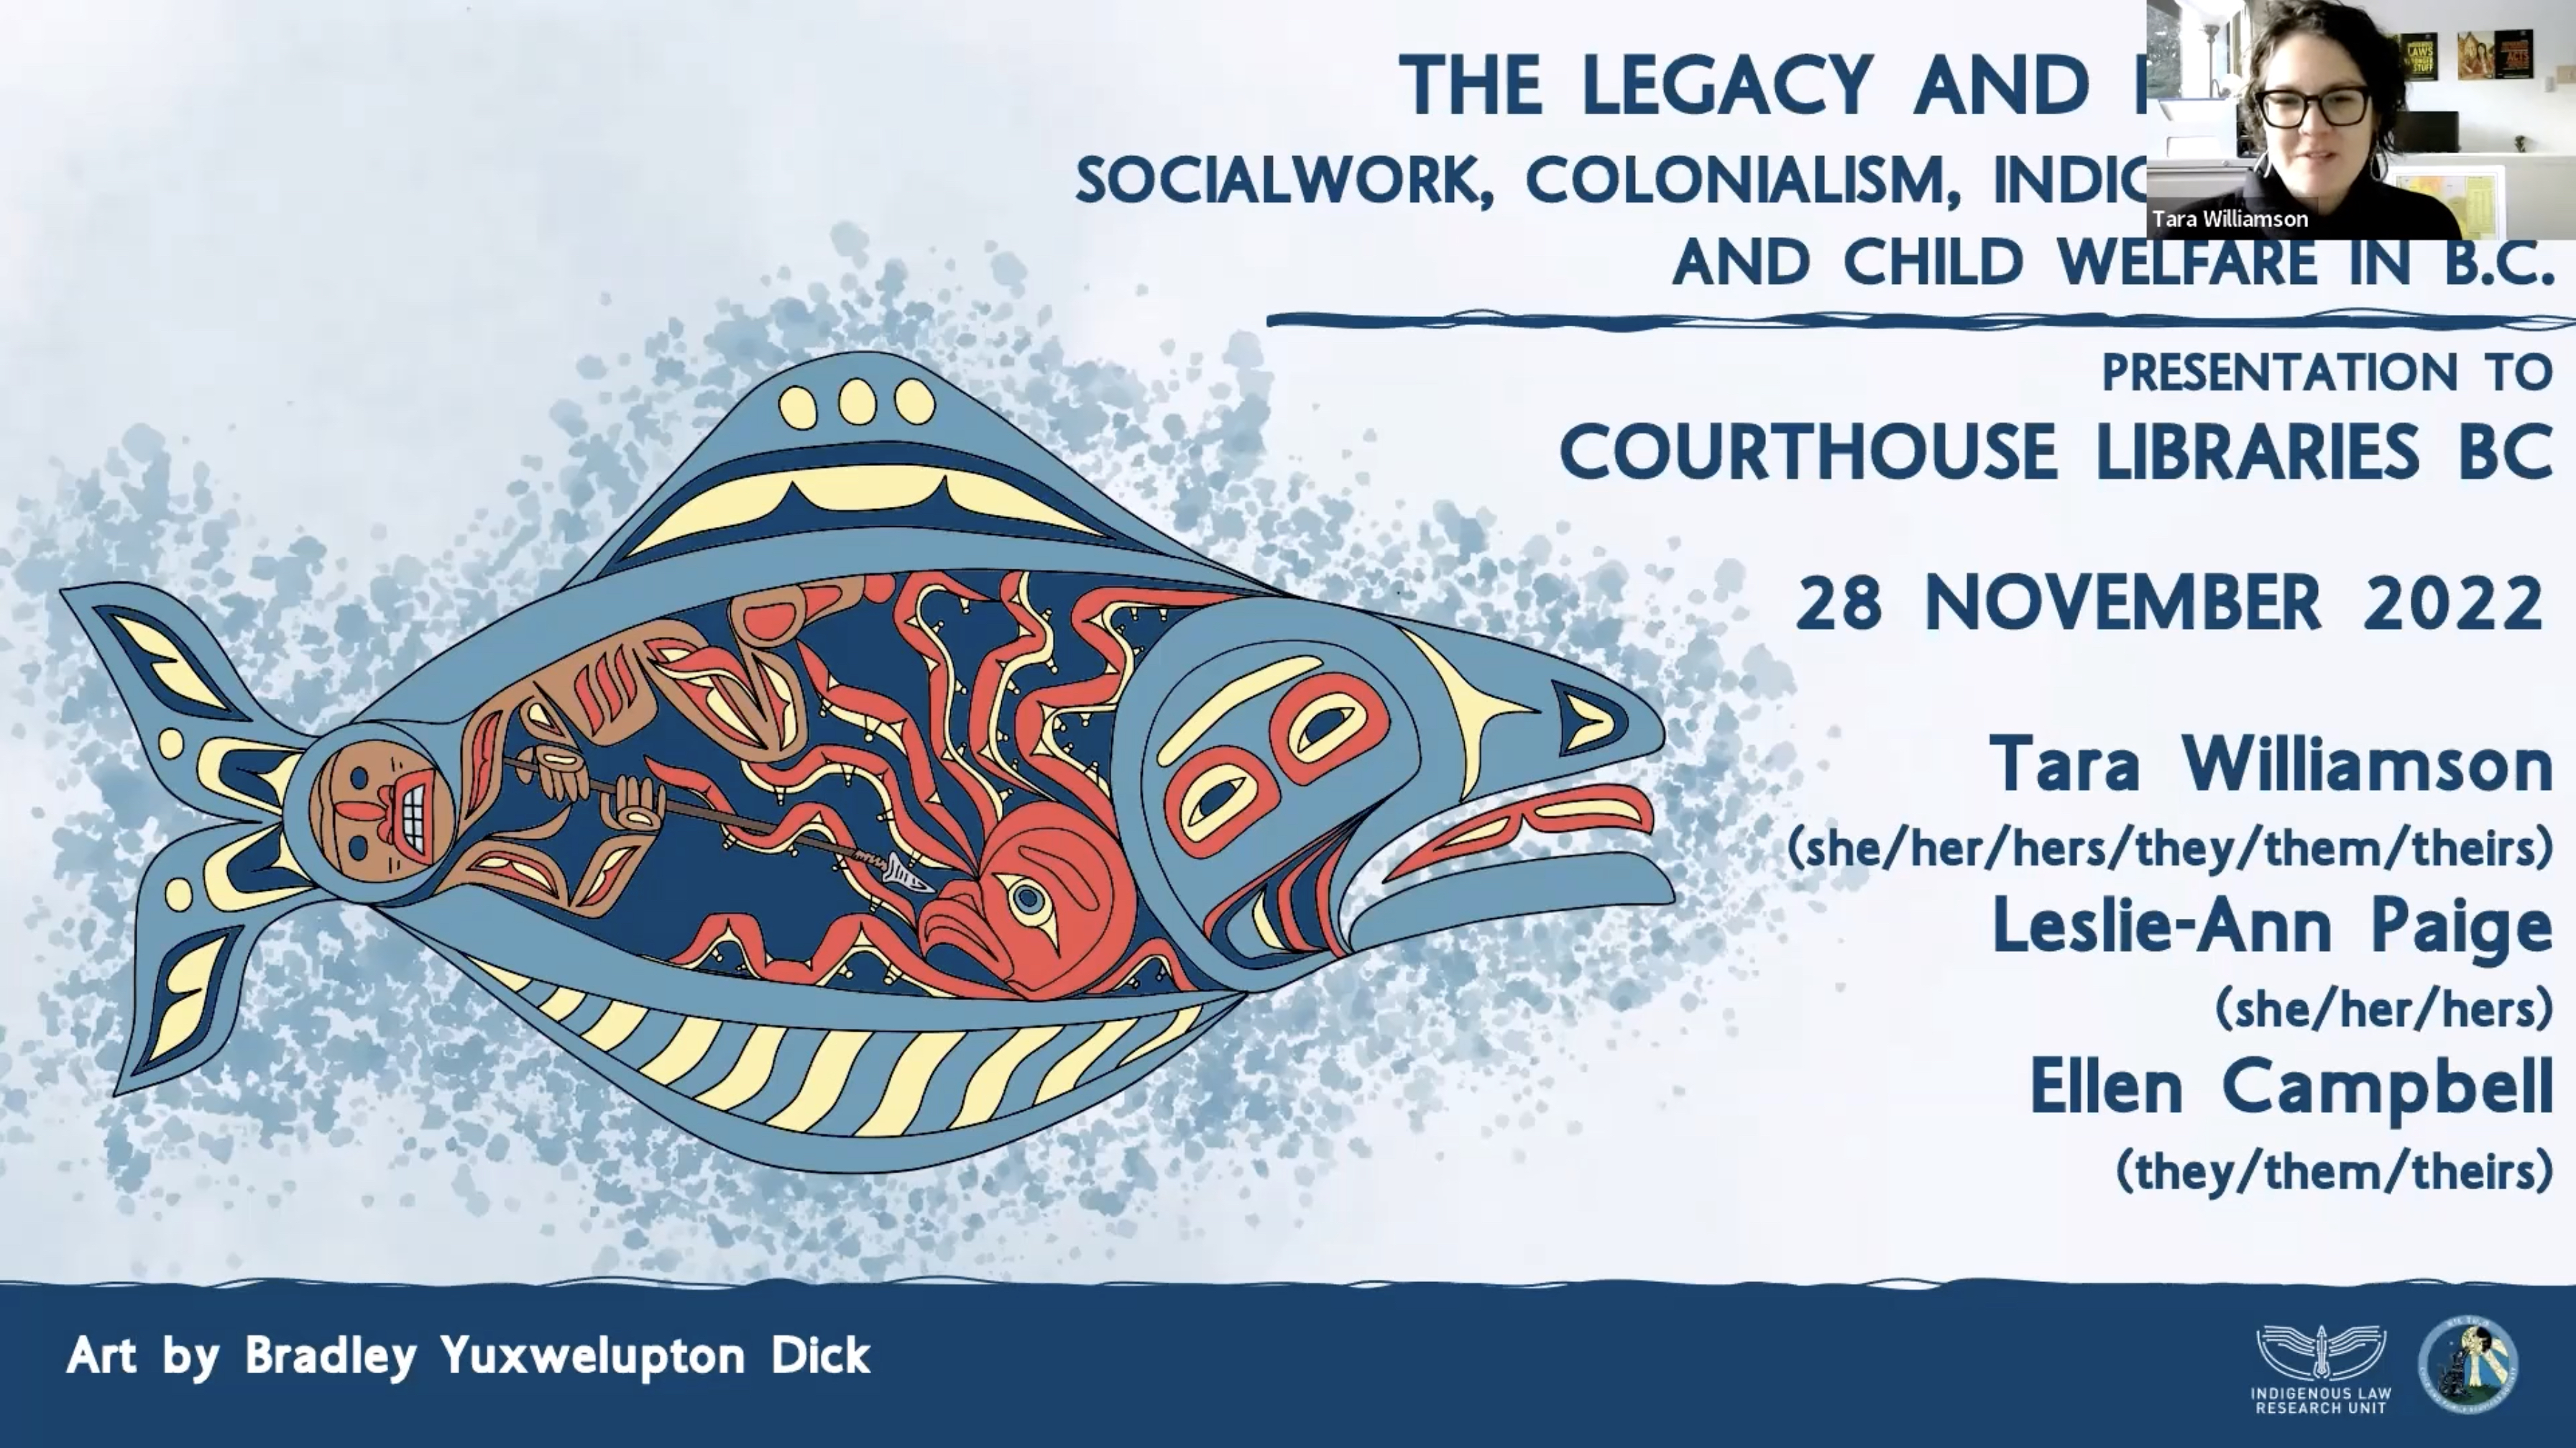 Watch: ILRU and NIȽ TU,O’s Presentation on The Legacy and Future of Social Work, Colonialism, Indigenous Law, and Child Welfare in B.C.